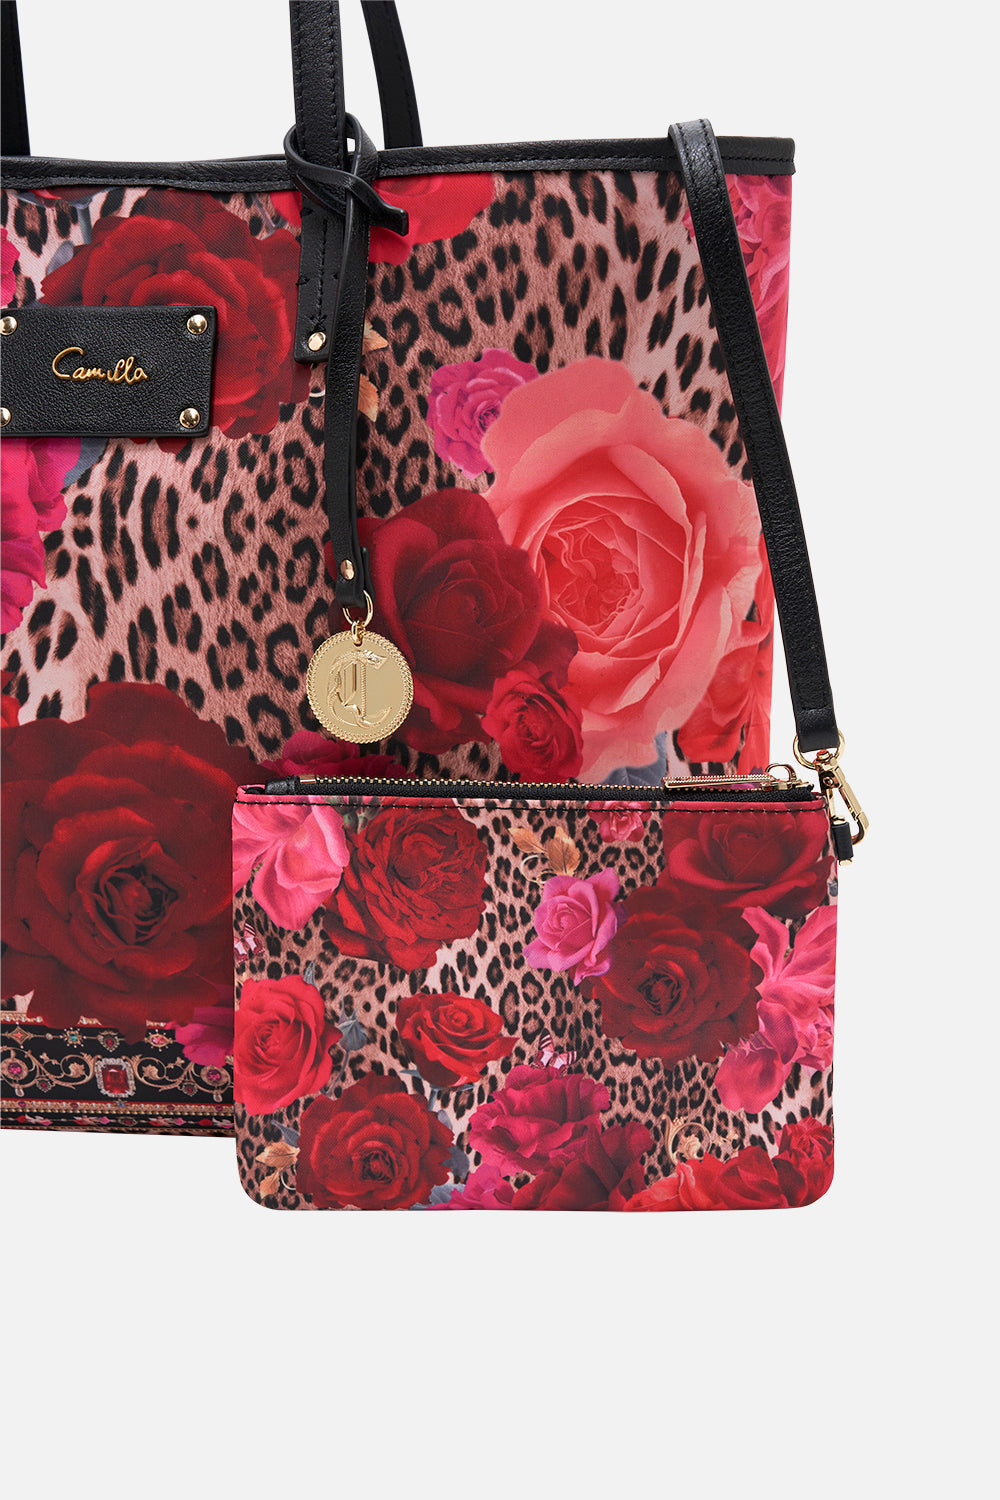 Product view of CAMILLA designer tote bag in Heart Like A Wildflower print 